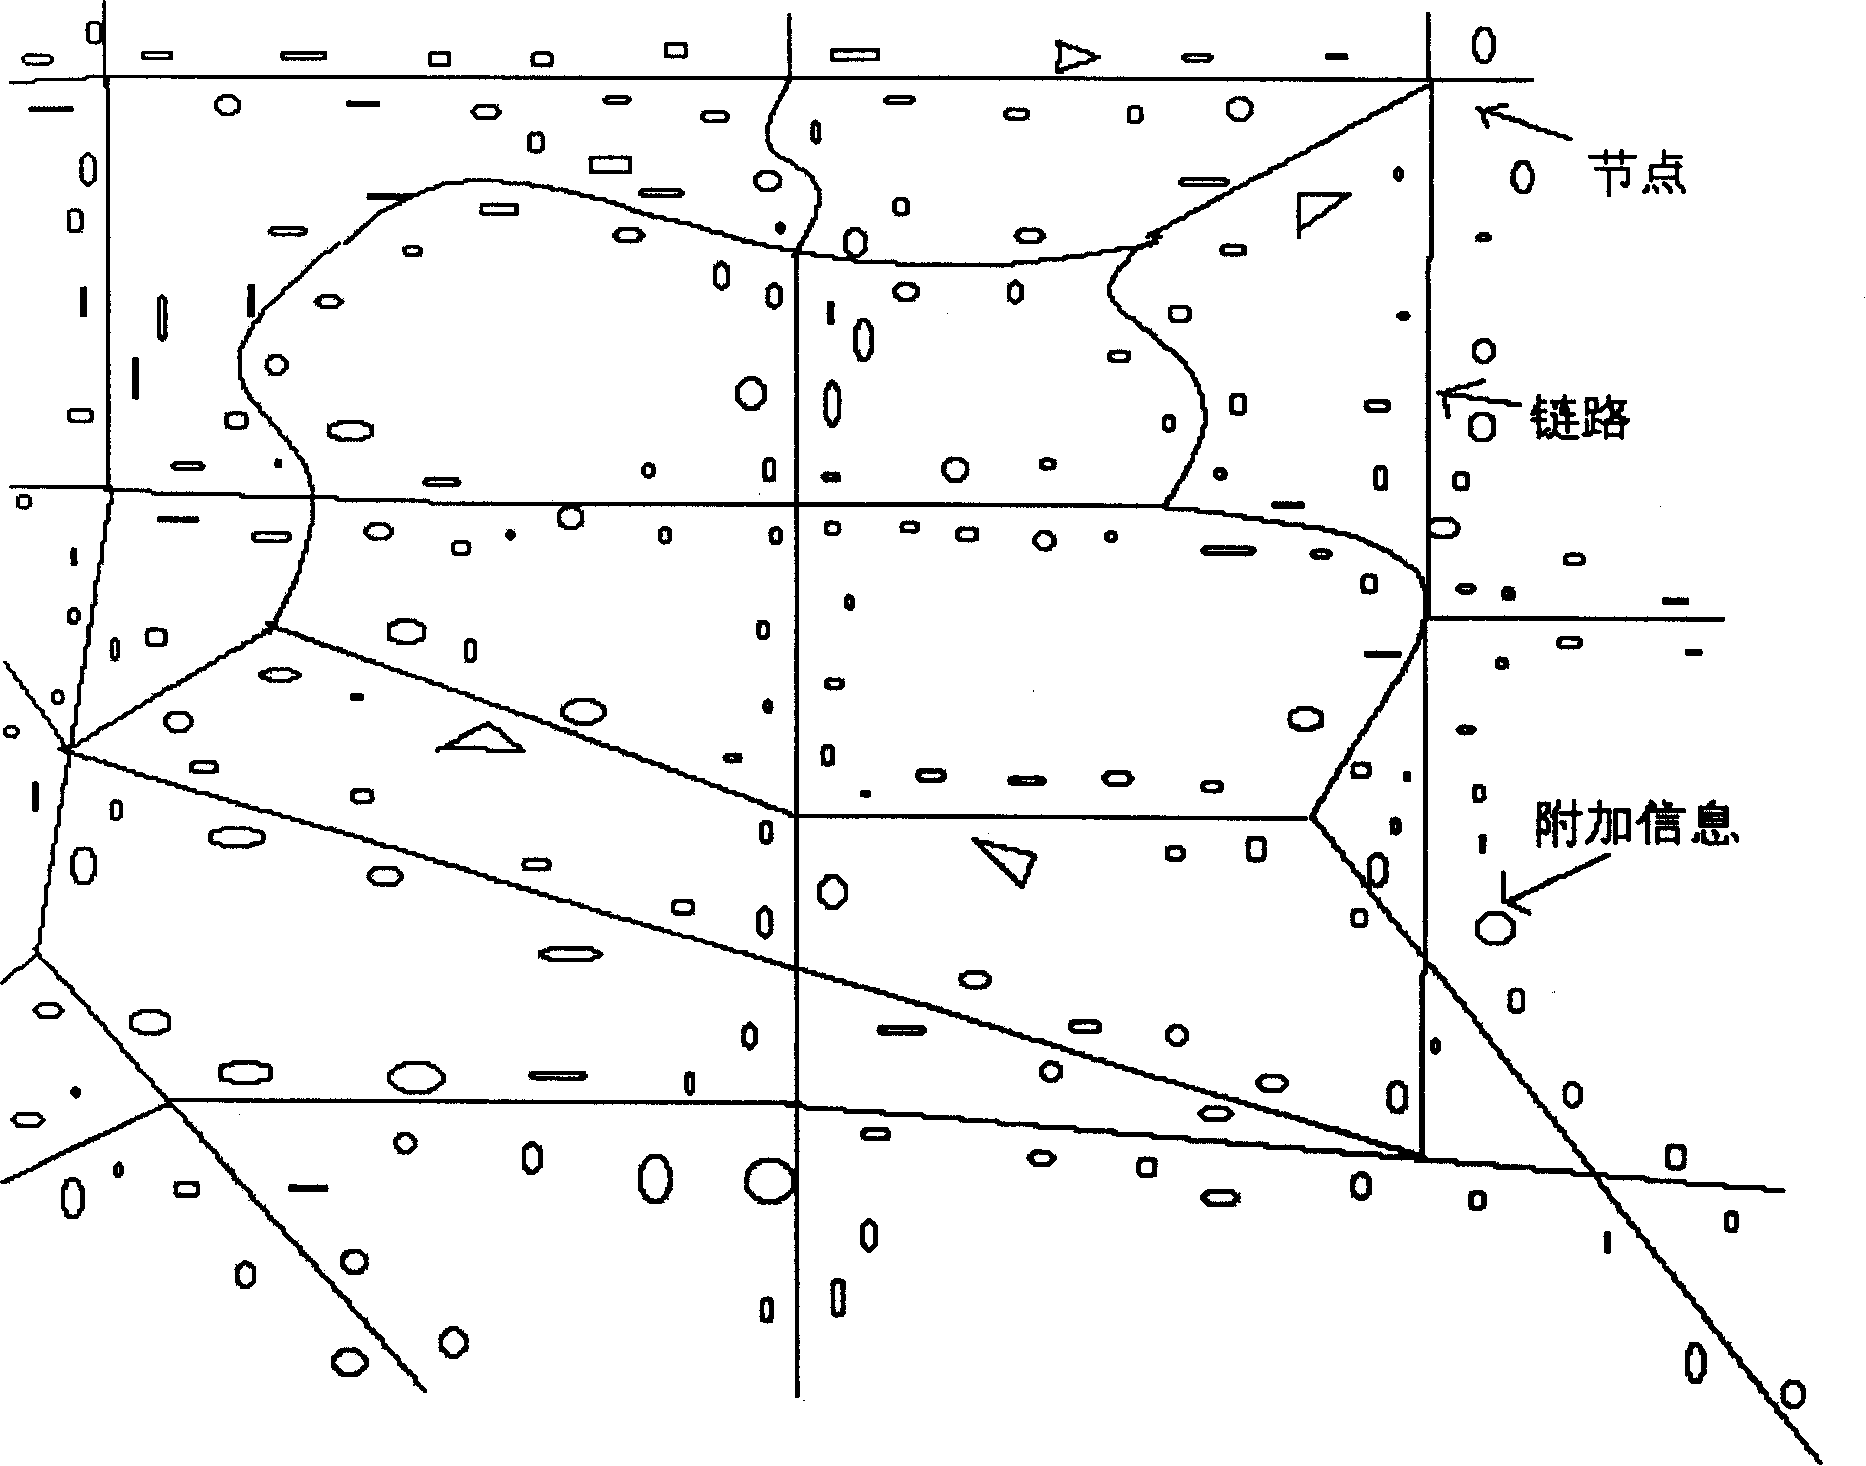 Method for making electronic map